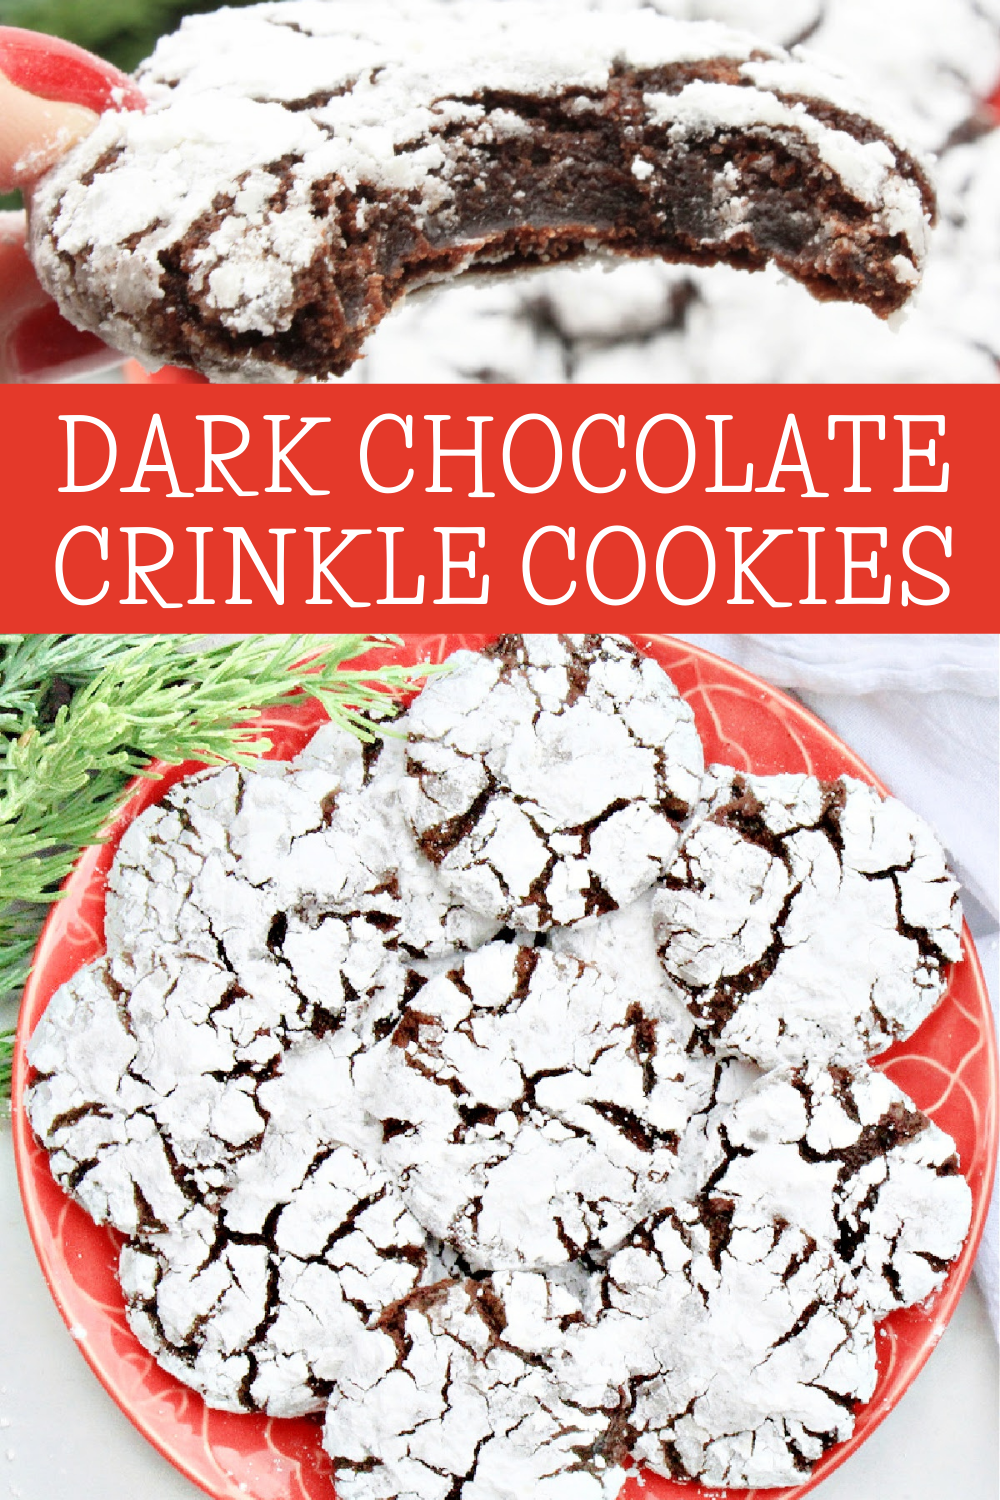 Dark Chocolate Crinkle Cookies ~ These classic Christmas cookies are soft, rich, and sweet with fudgy centers and layers of powdered sugar. Perfect for holiday snacking!  via @thiswifecooks